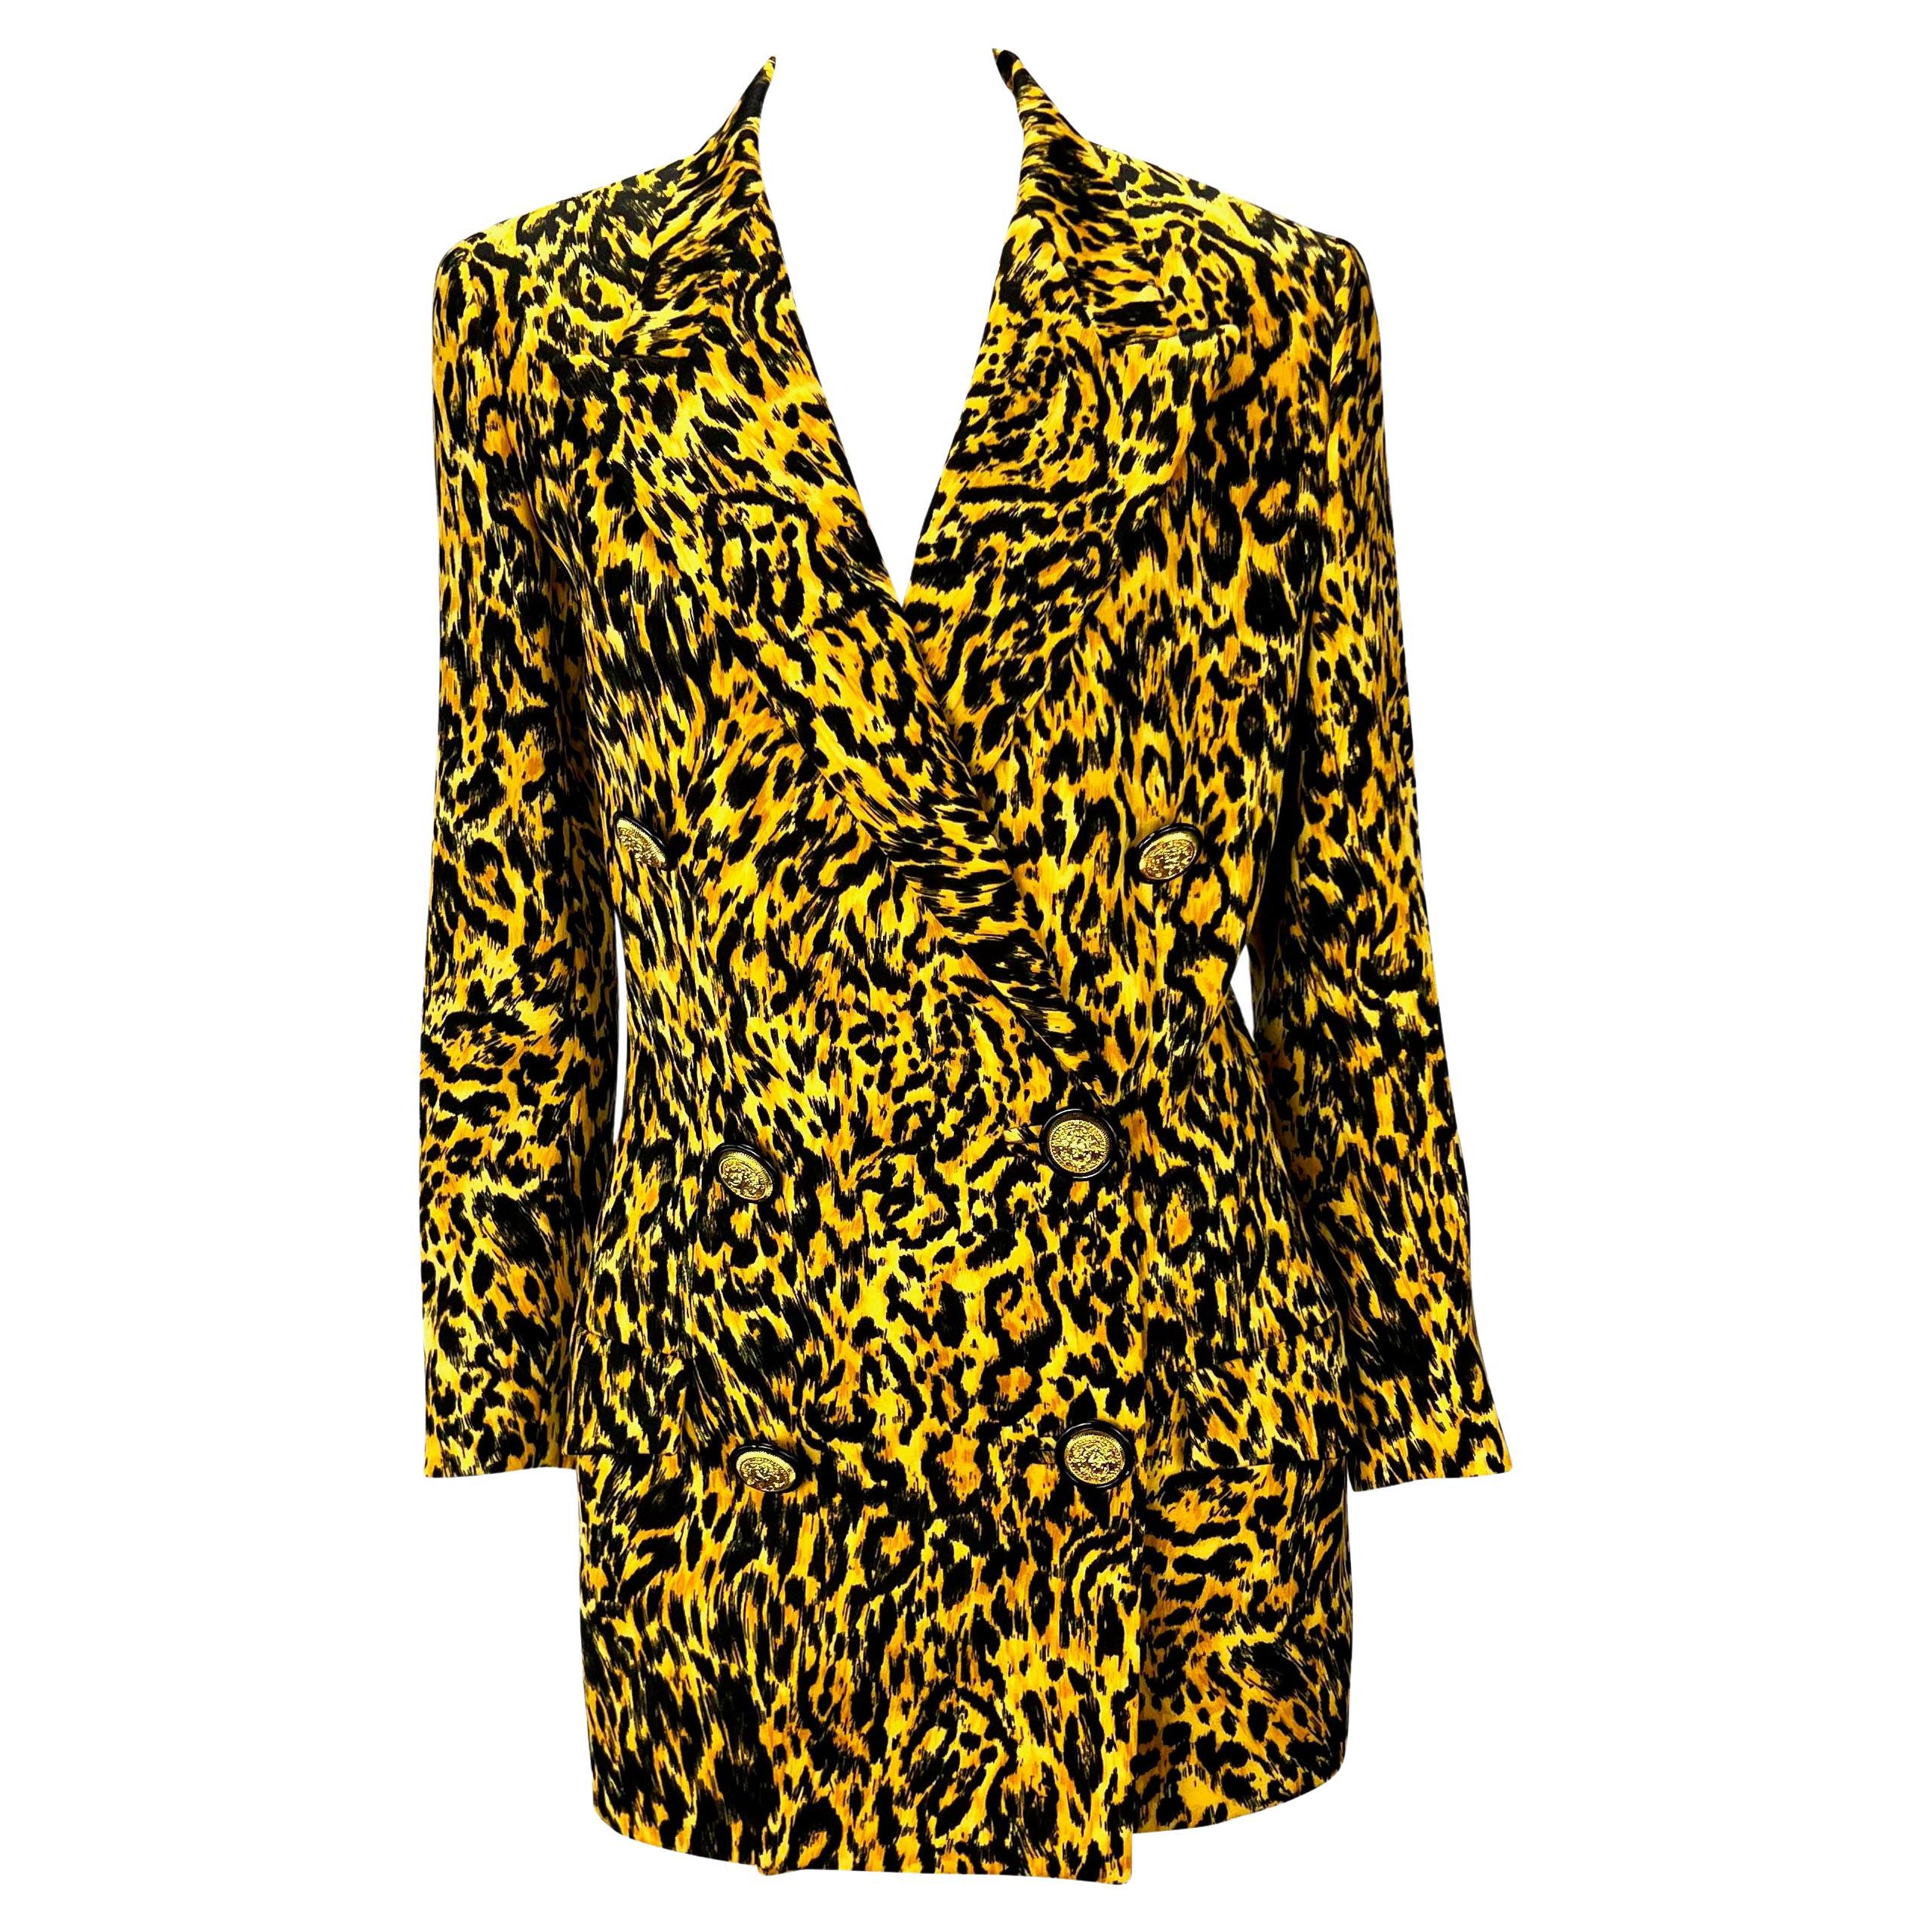 NWT F/W 1992 Gianni Versace Couture Leopard Print Wolle doppelreihiger Blazer